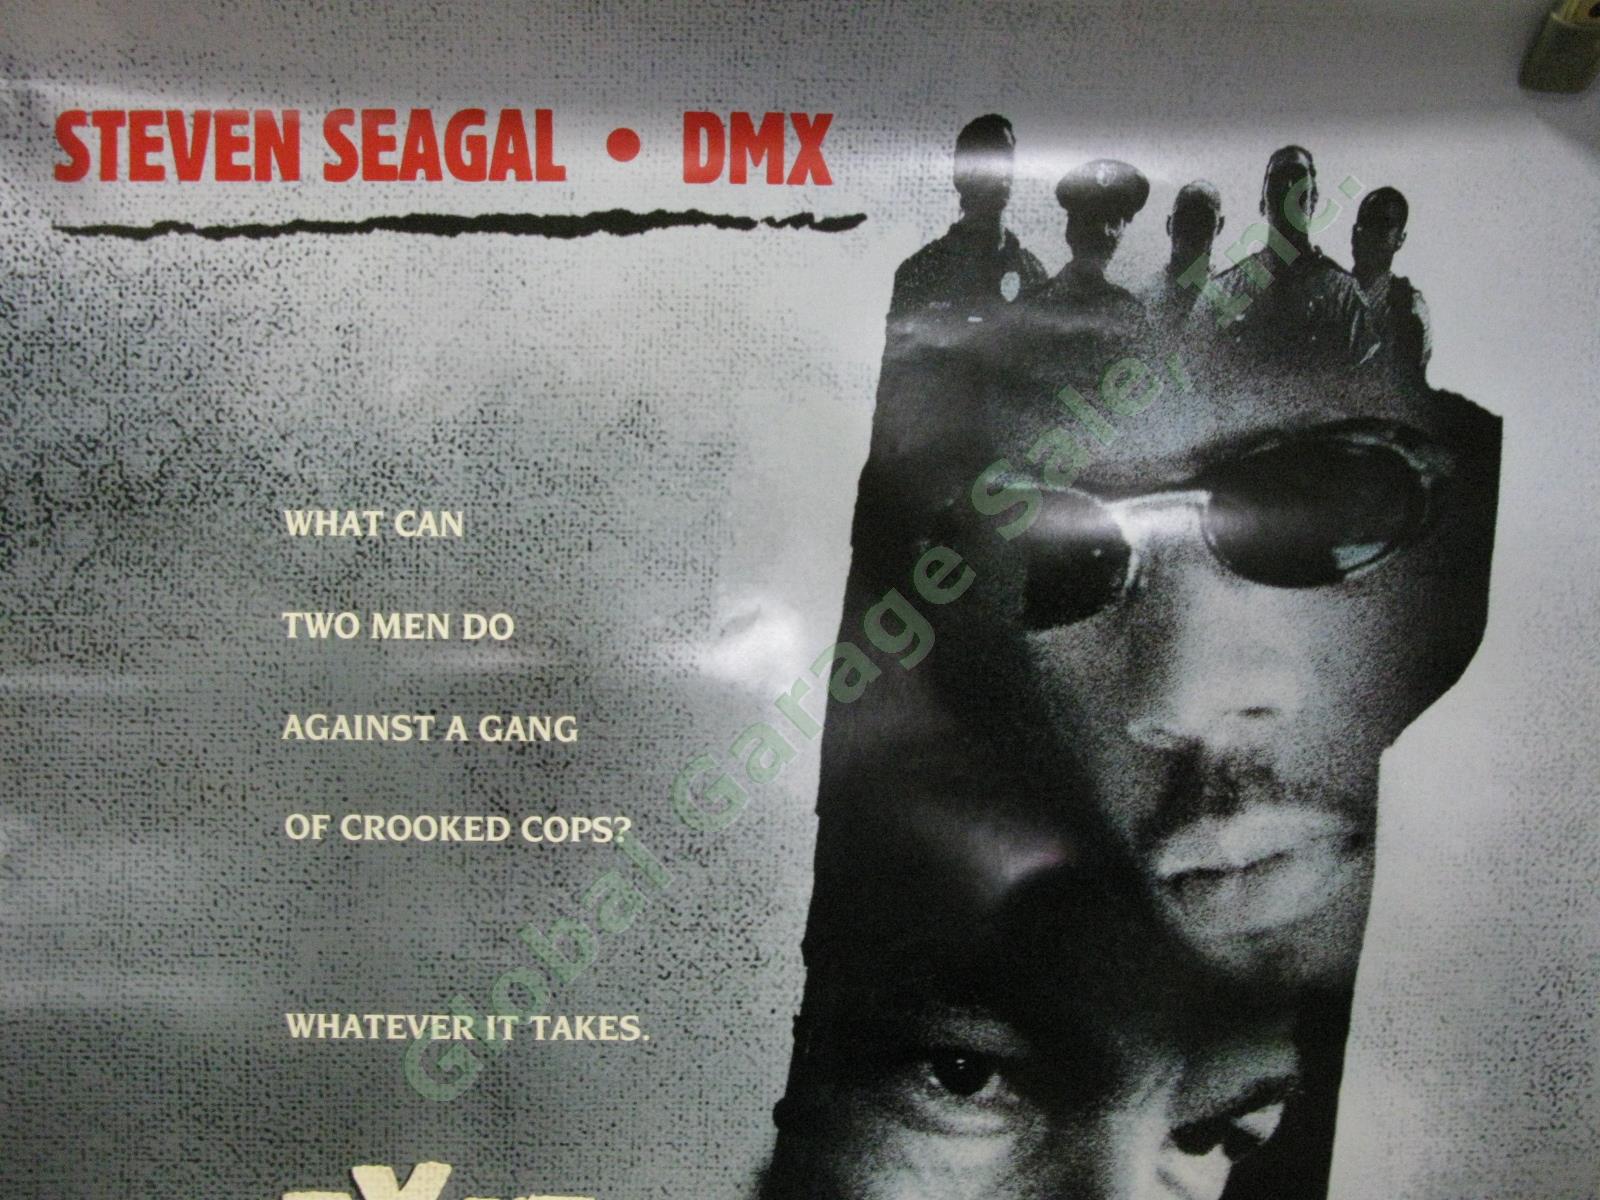 Exit Wounds Original Movie Theater Lobby Promo Poster DMX Steven Seagal Police 1